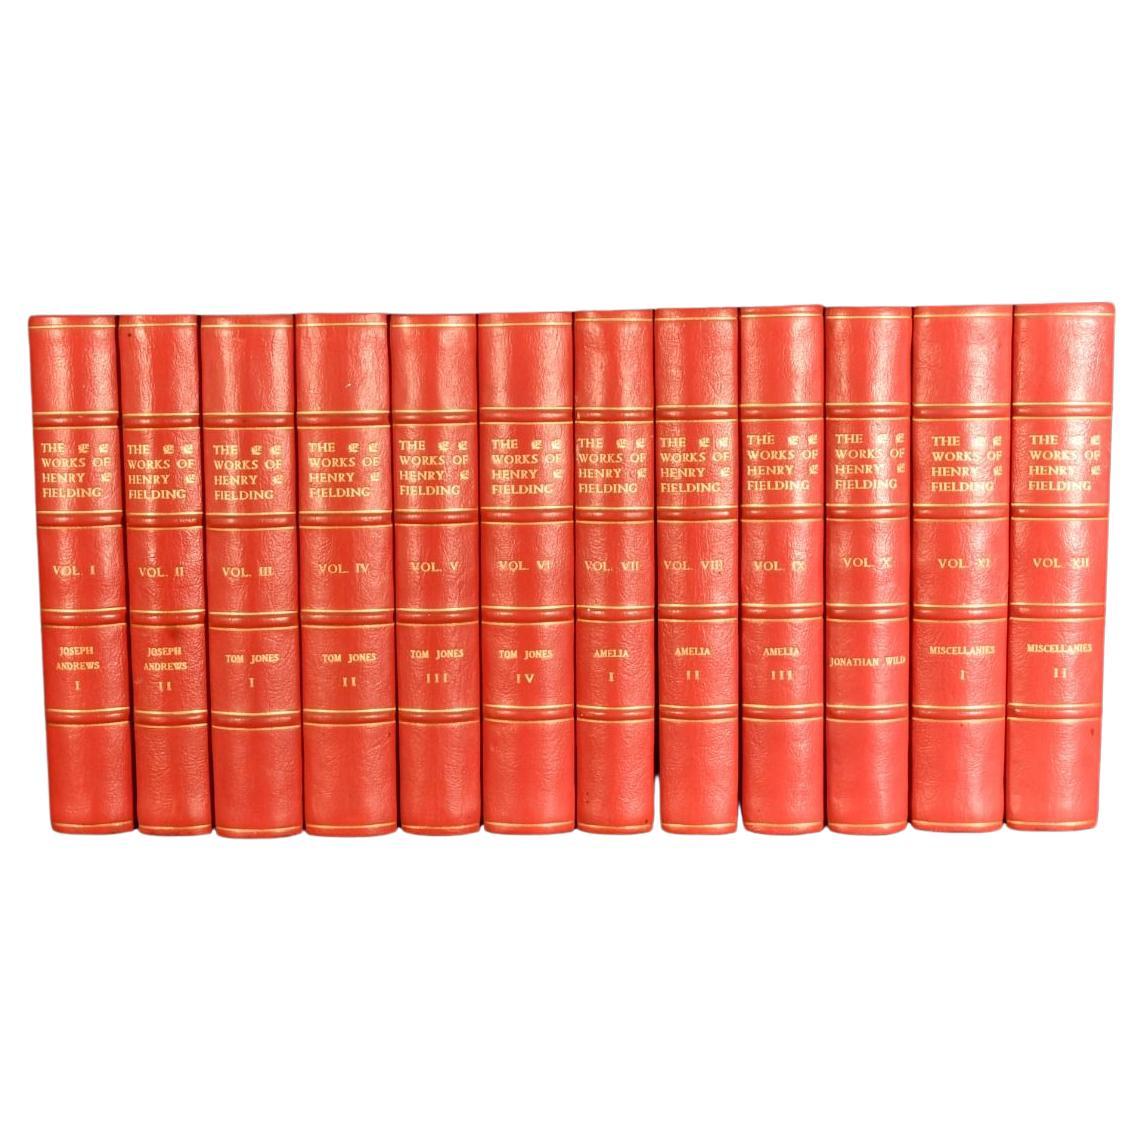 1898-1899 The Works of Henry Fielding